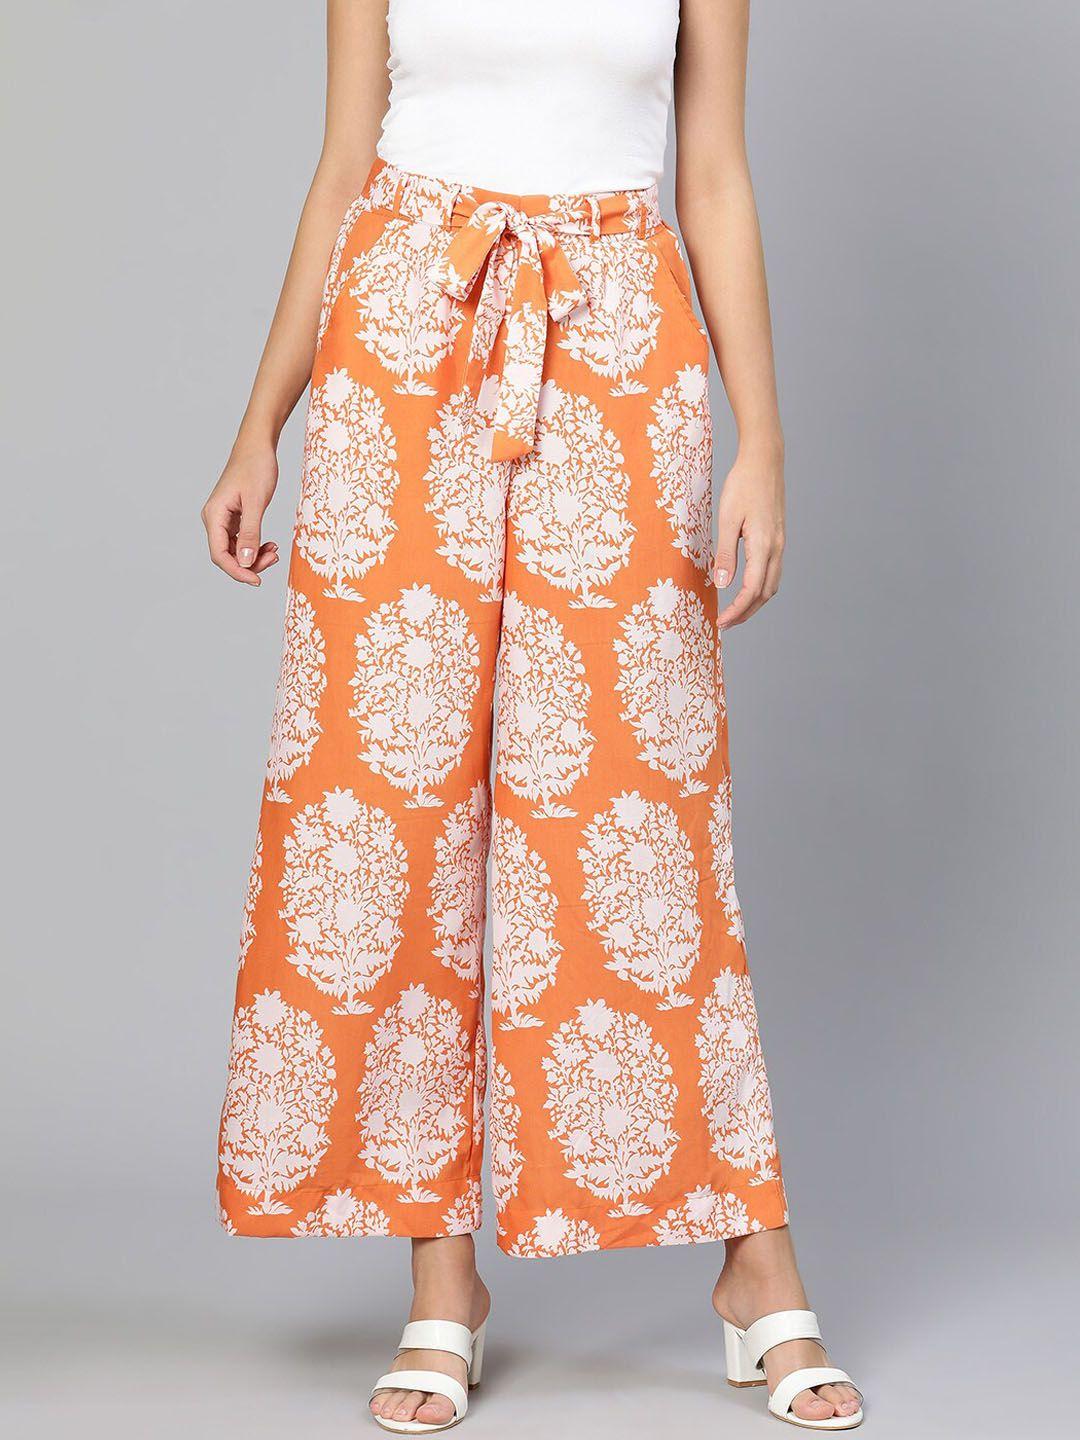 oxolloxo women orange floral printed trousers